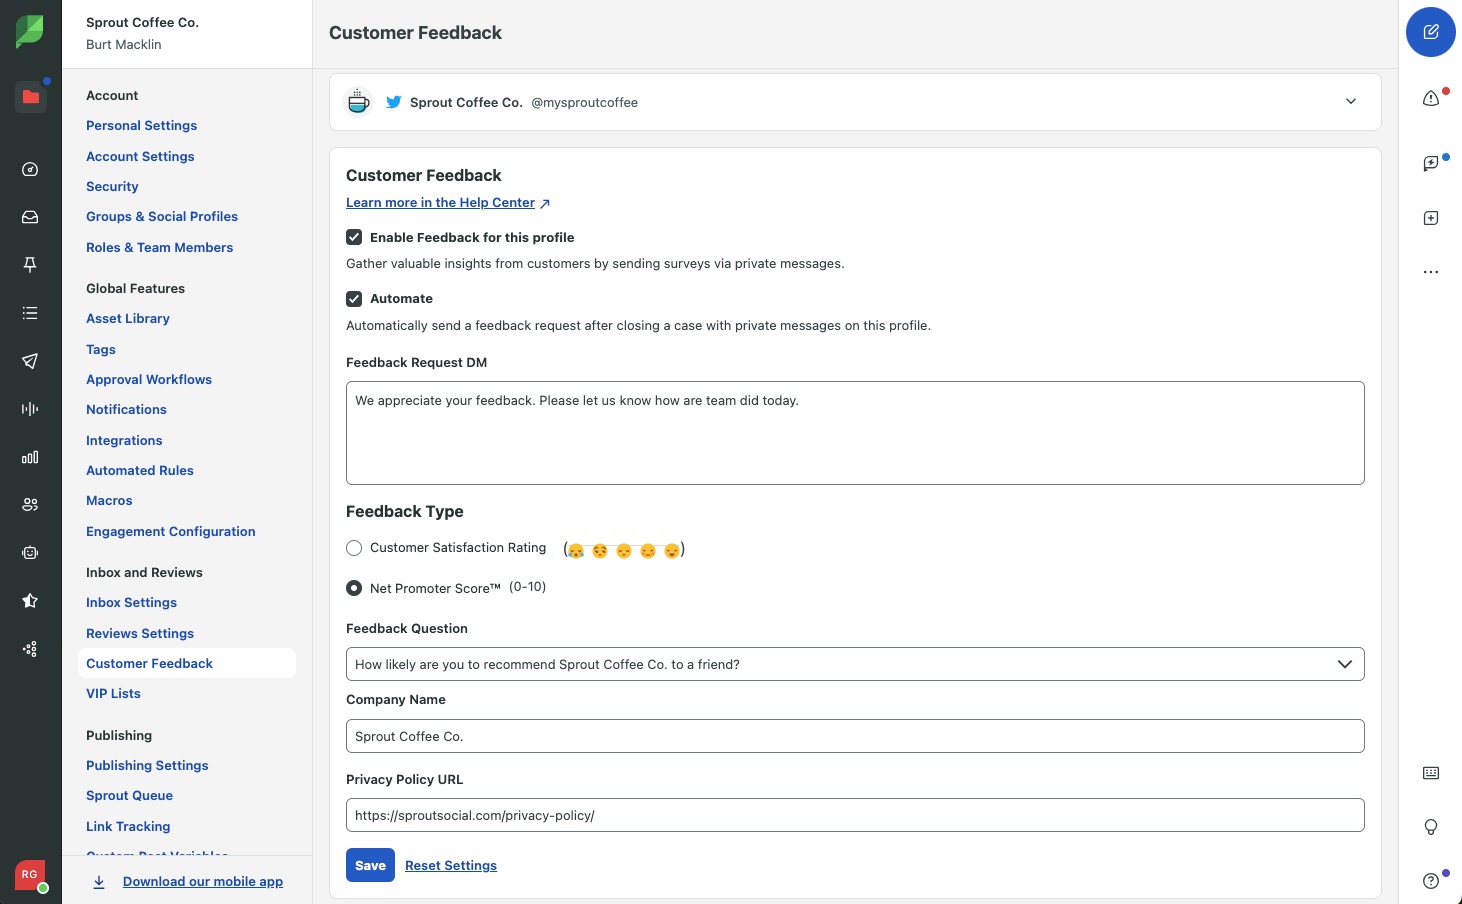 The Customer Feedback configuration settings in Sprout Social. Users can choose to automate the collection of Net Promoter Score data using Sprout’s Customer Feedback tools.